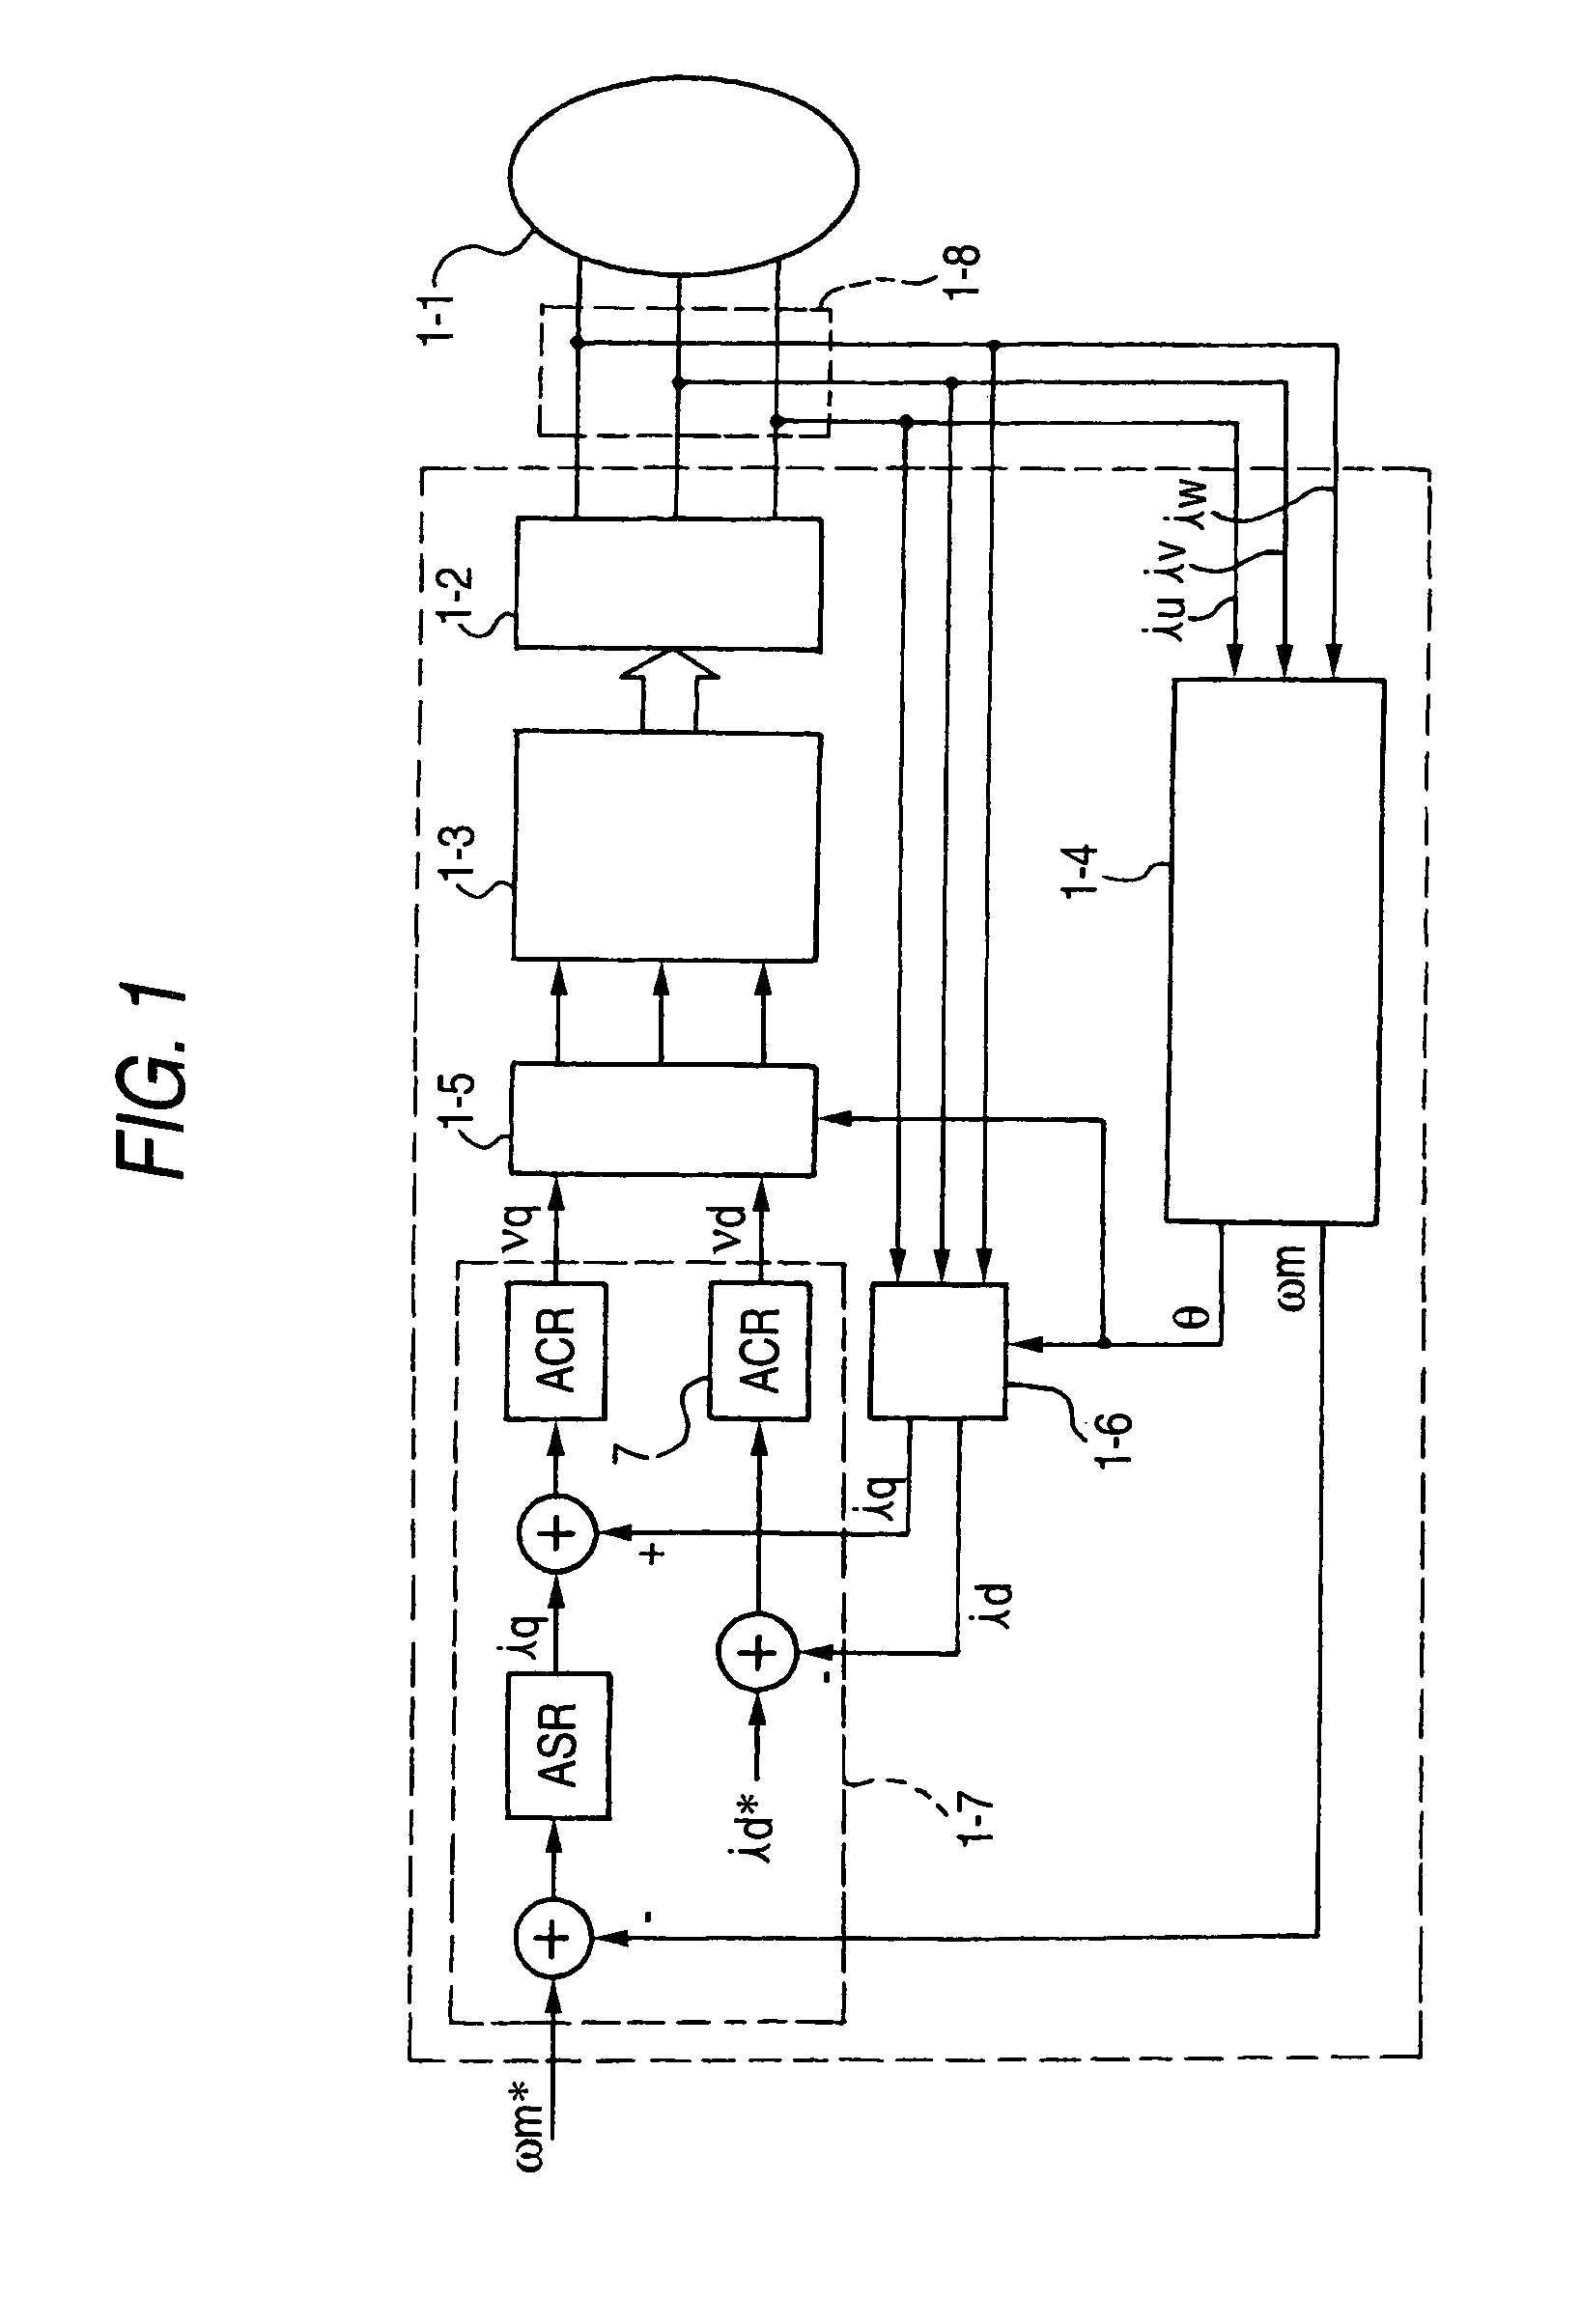 Motor magnetic pole position estimation device and control device